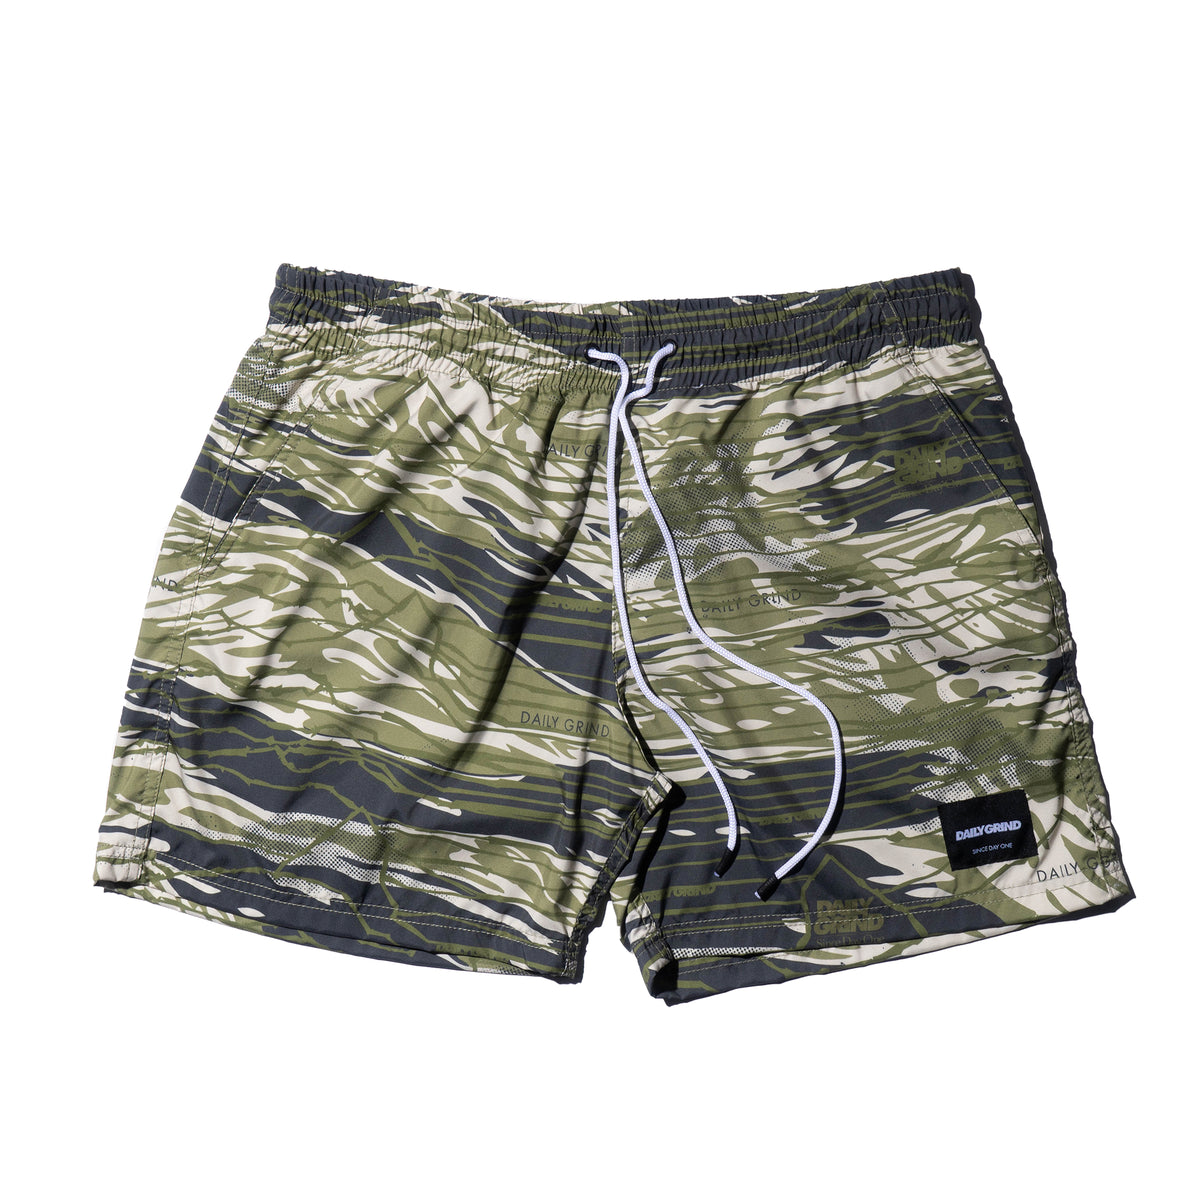 DAILY GRIND STICK SHORTS CAMOU | Daily Grind Store PH